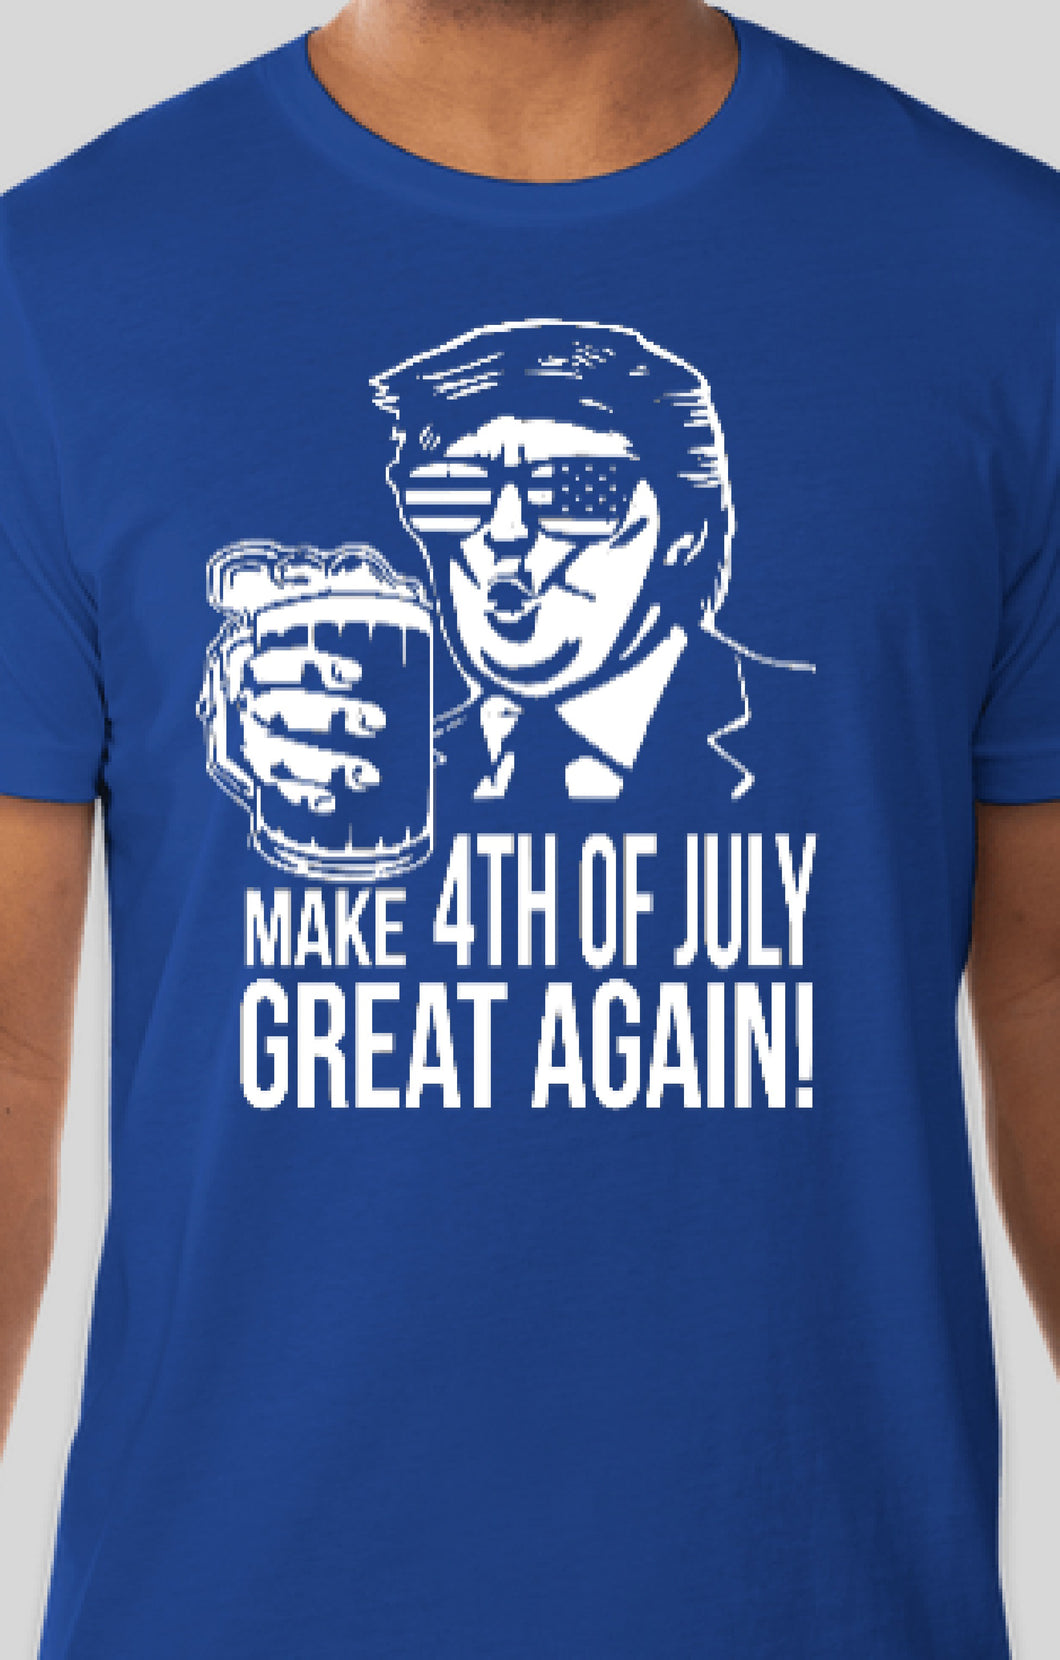 Make 4th of July Great Again!